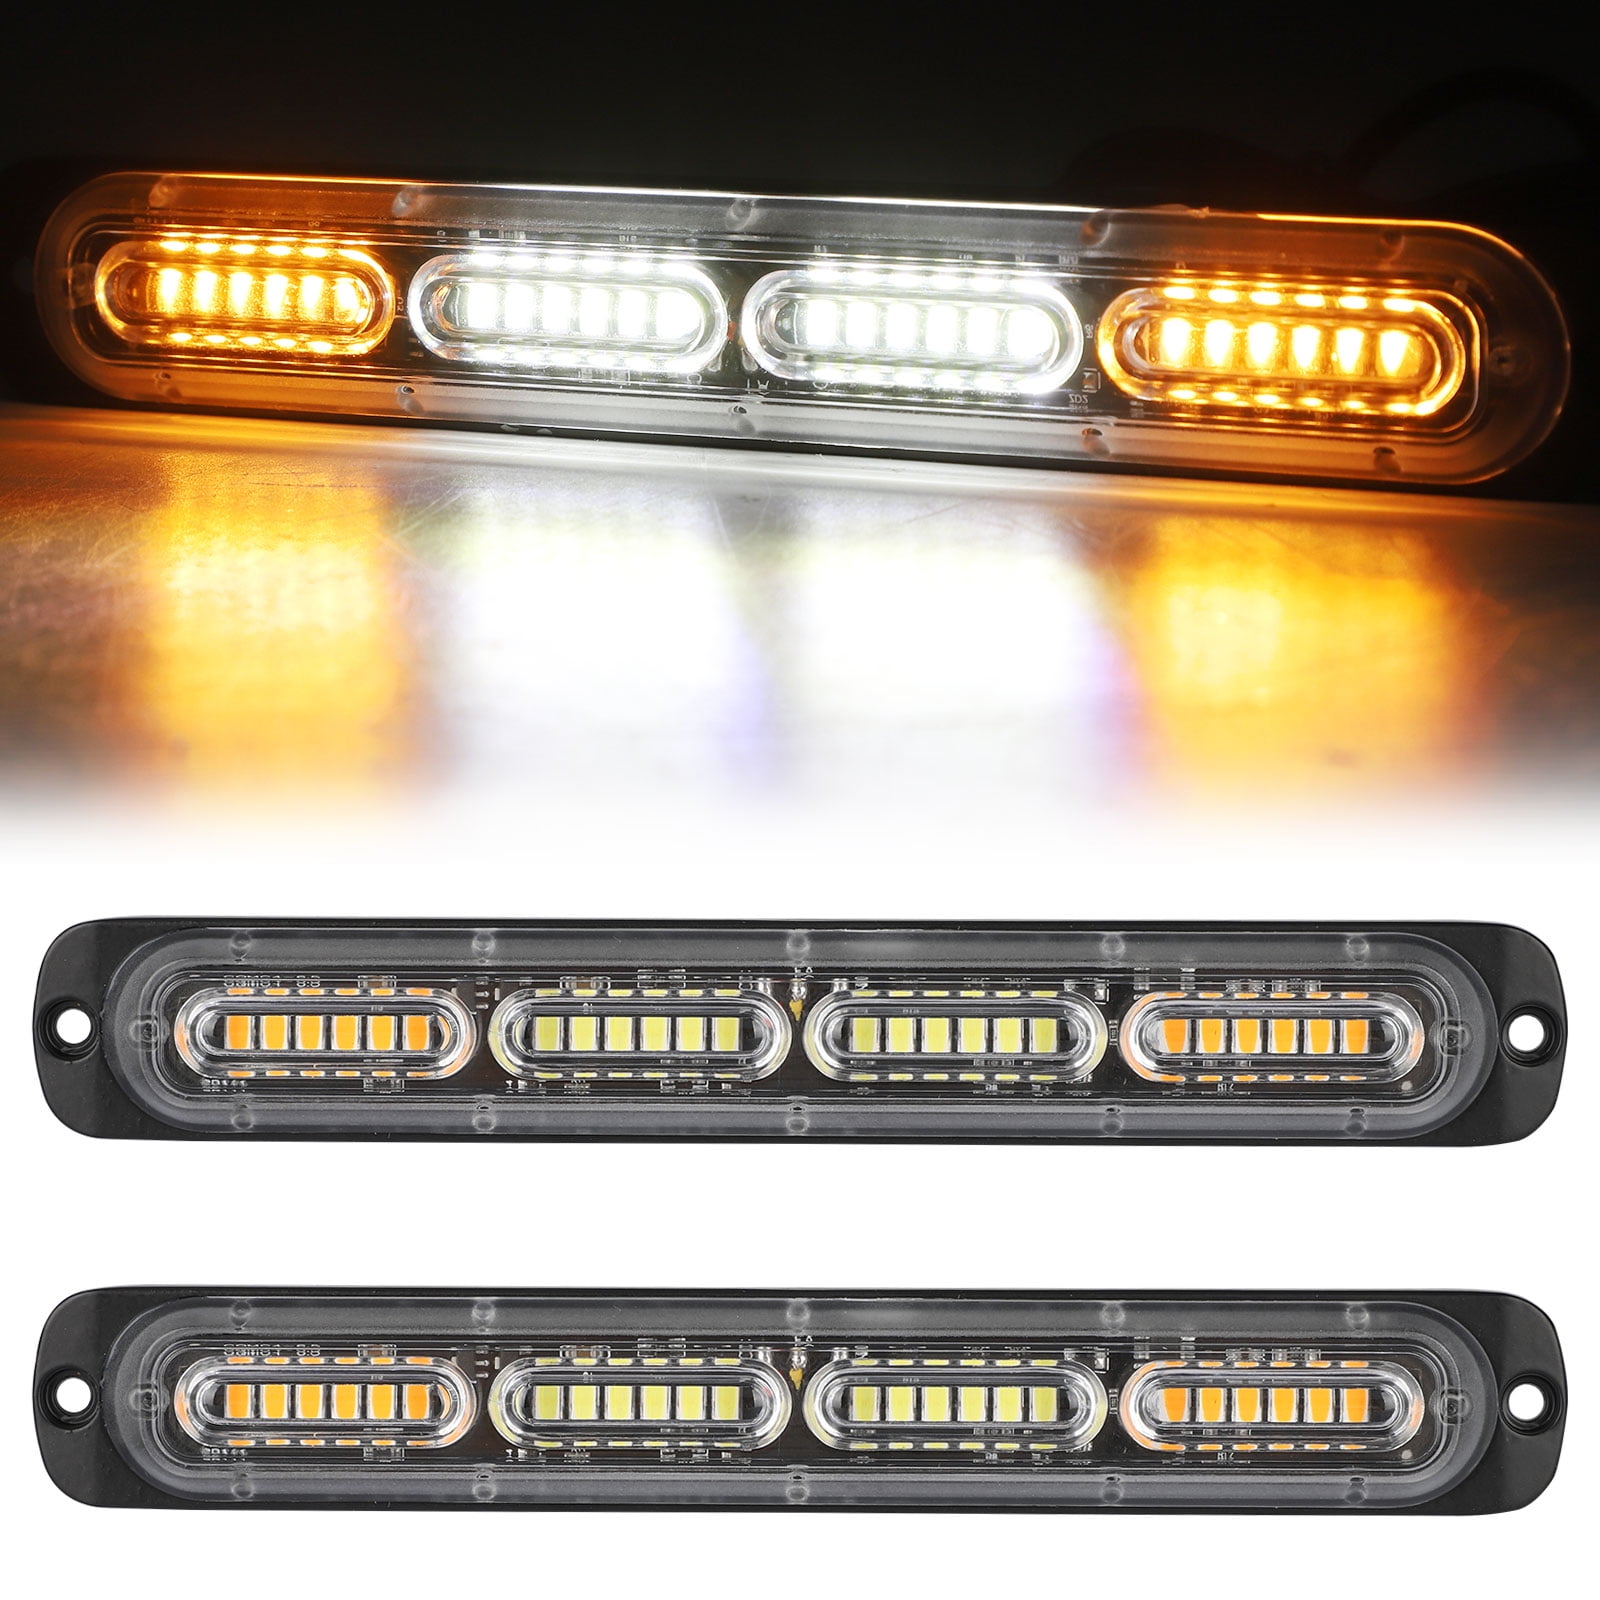 2*DC12V Stainless Steel 24LED Amber Motorcycle Front Fork Turn Signal Lamp Strip 